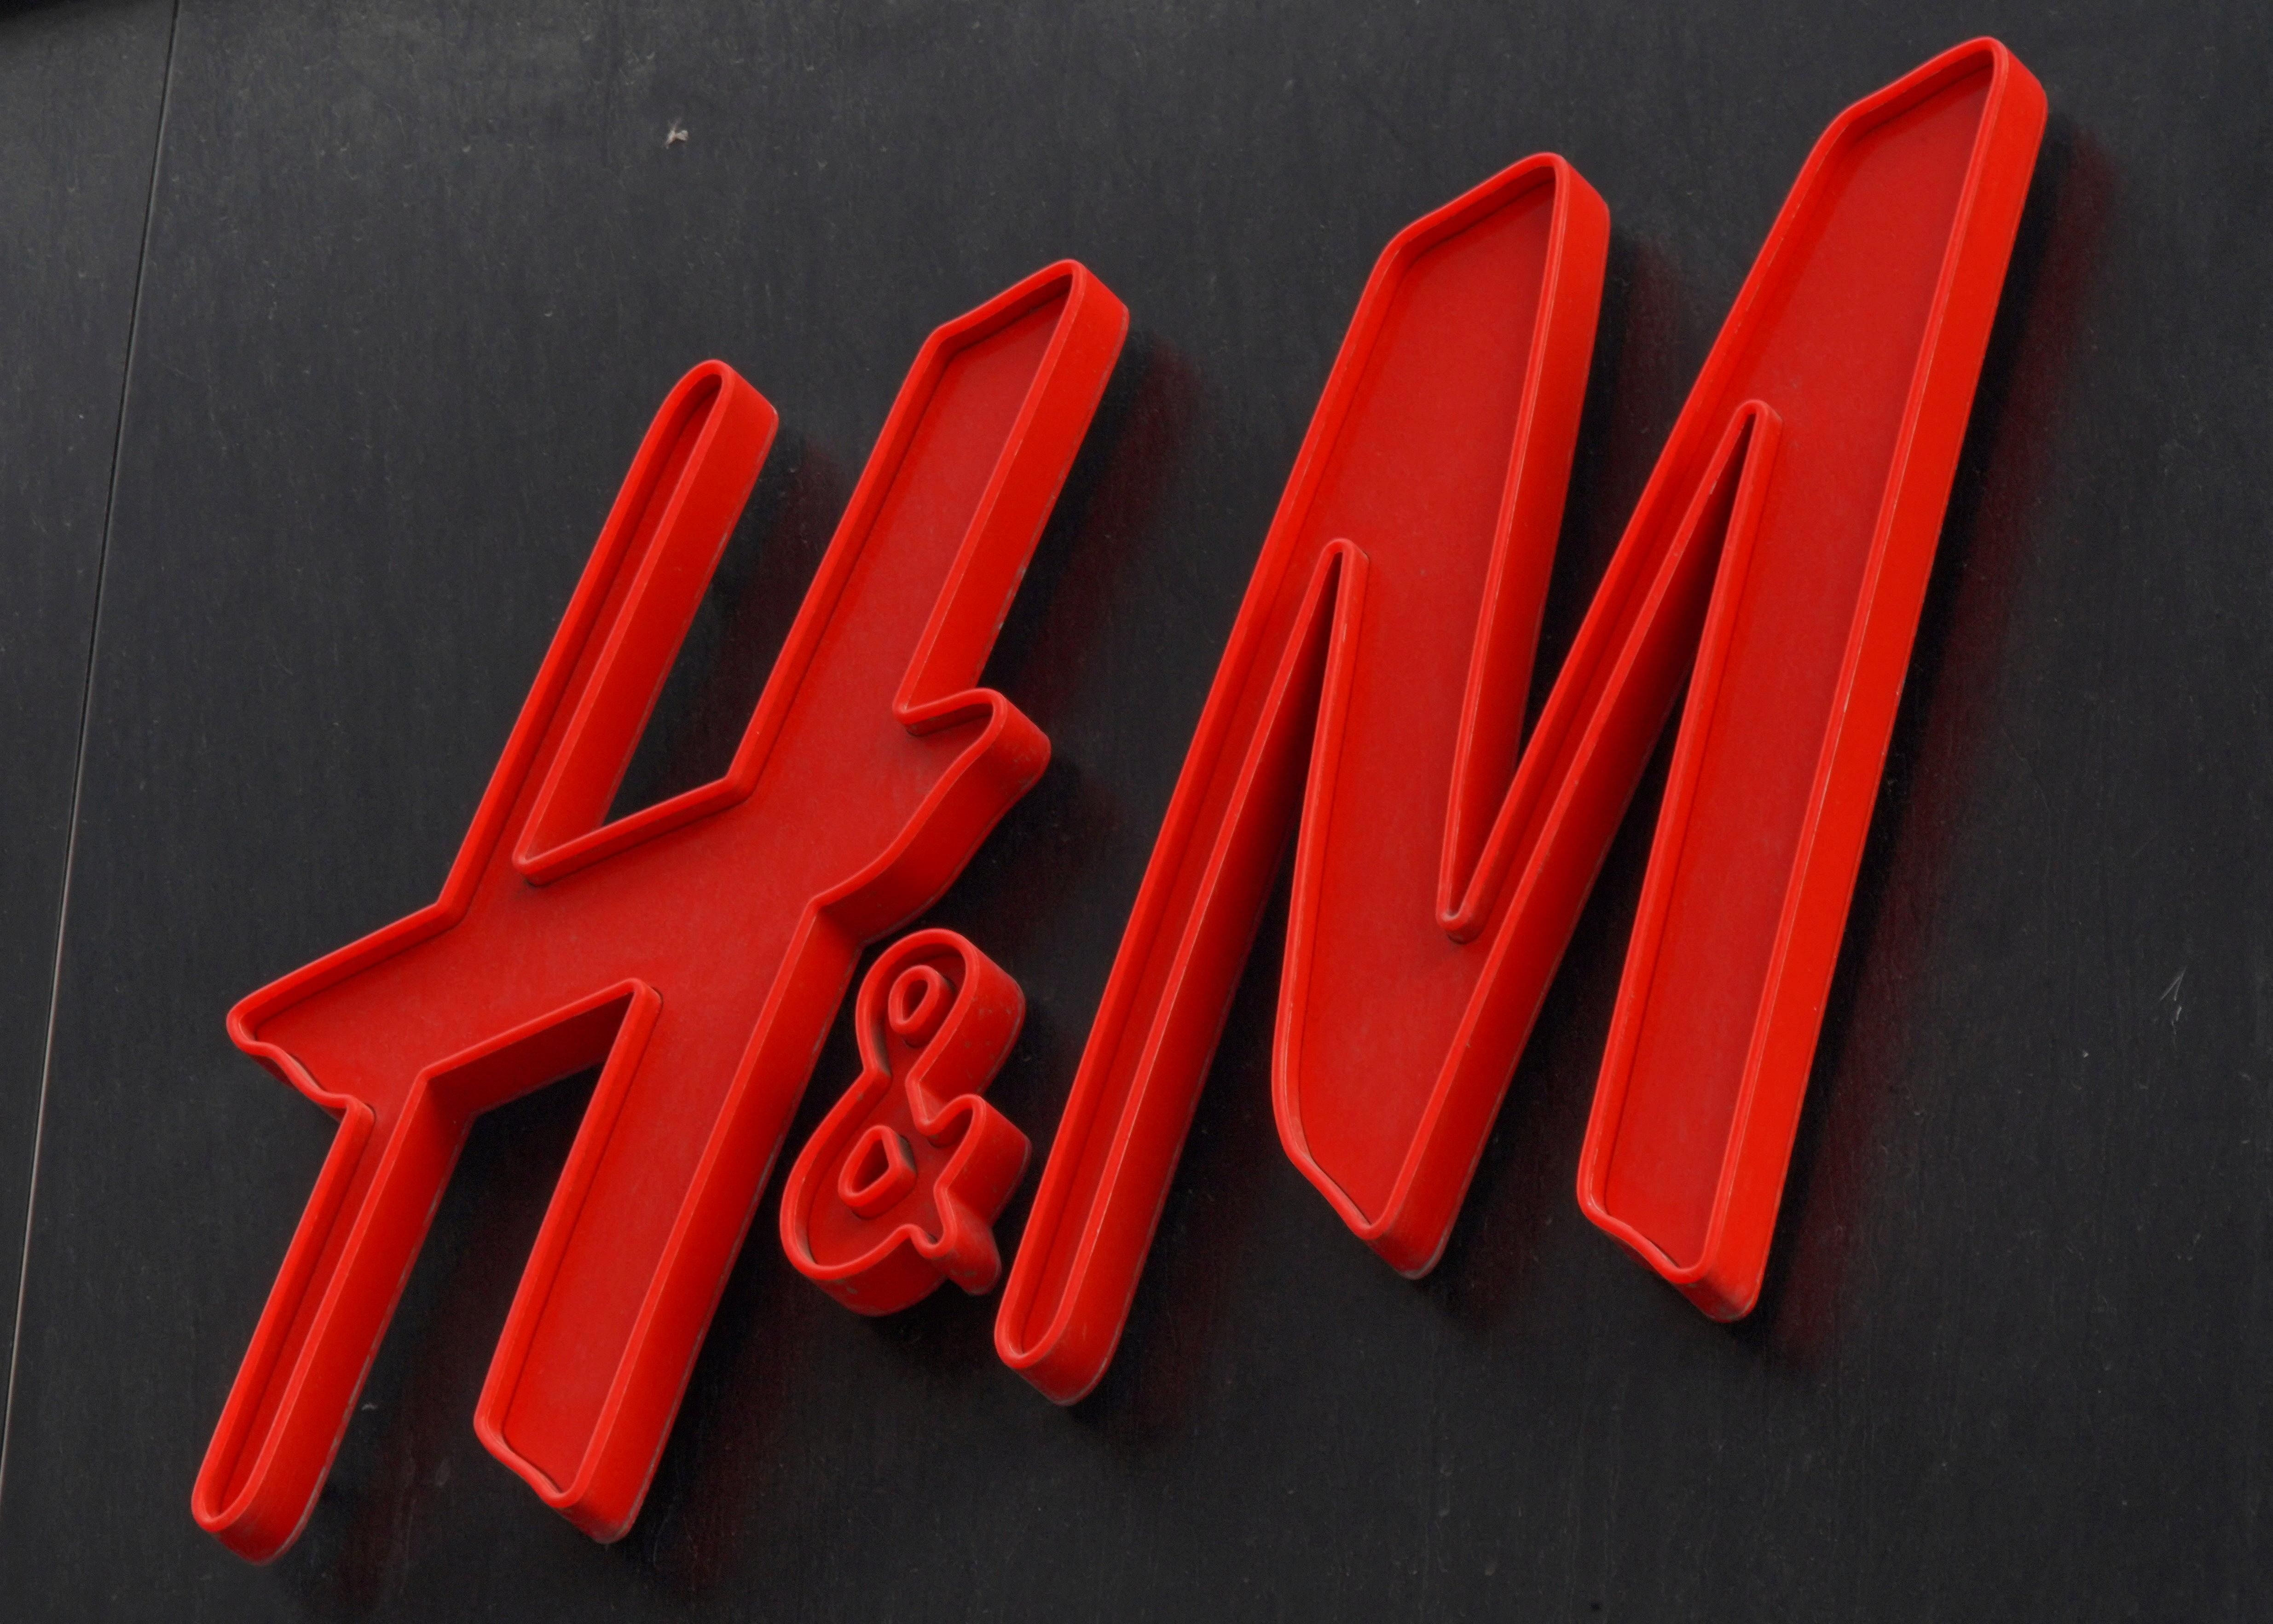 H&M slips out of fashion as first-quarter sales lag